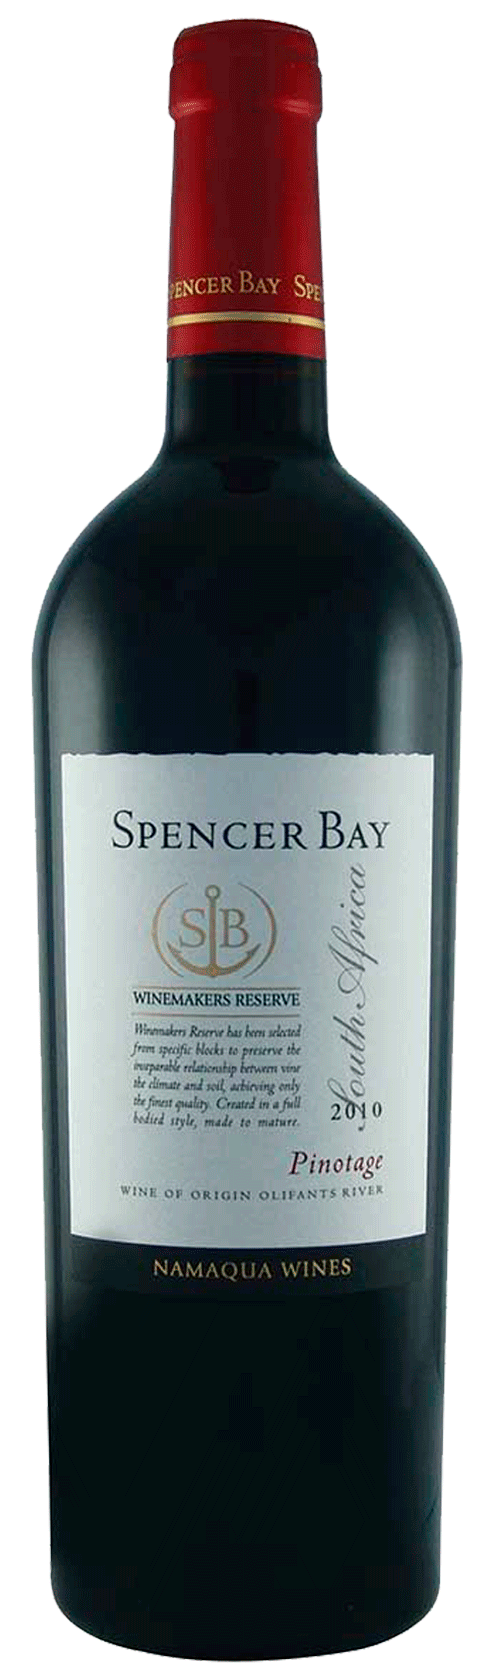 Spencer Bay Reserve Pinotage 2010